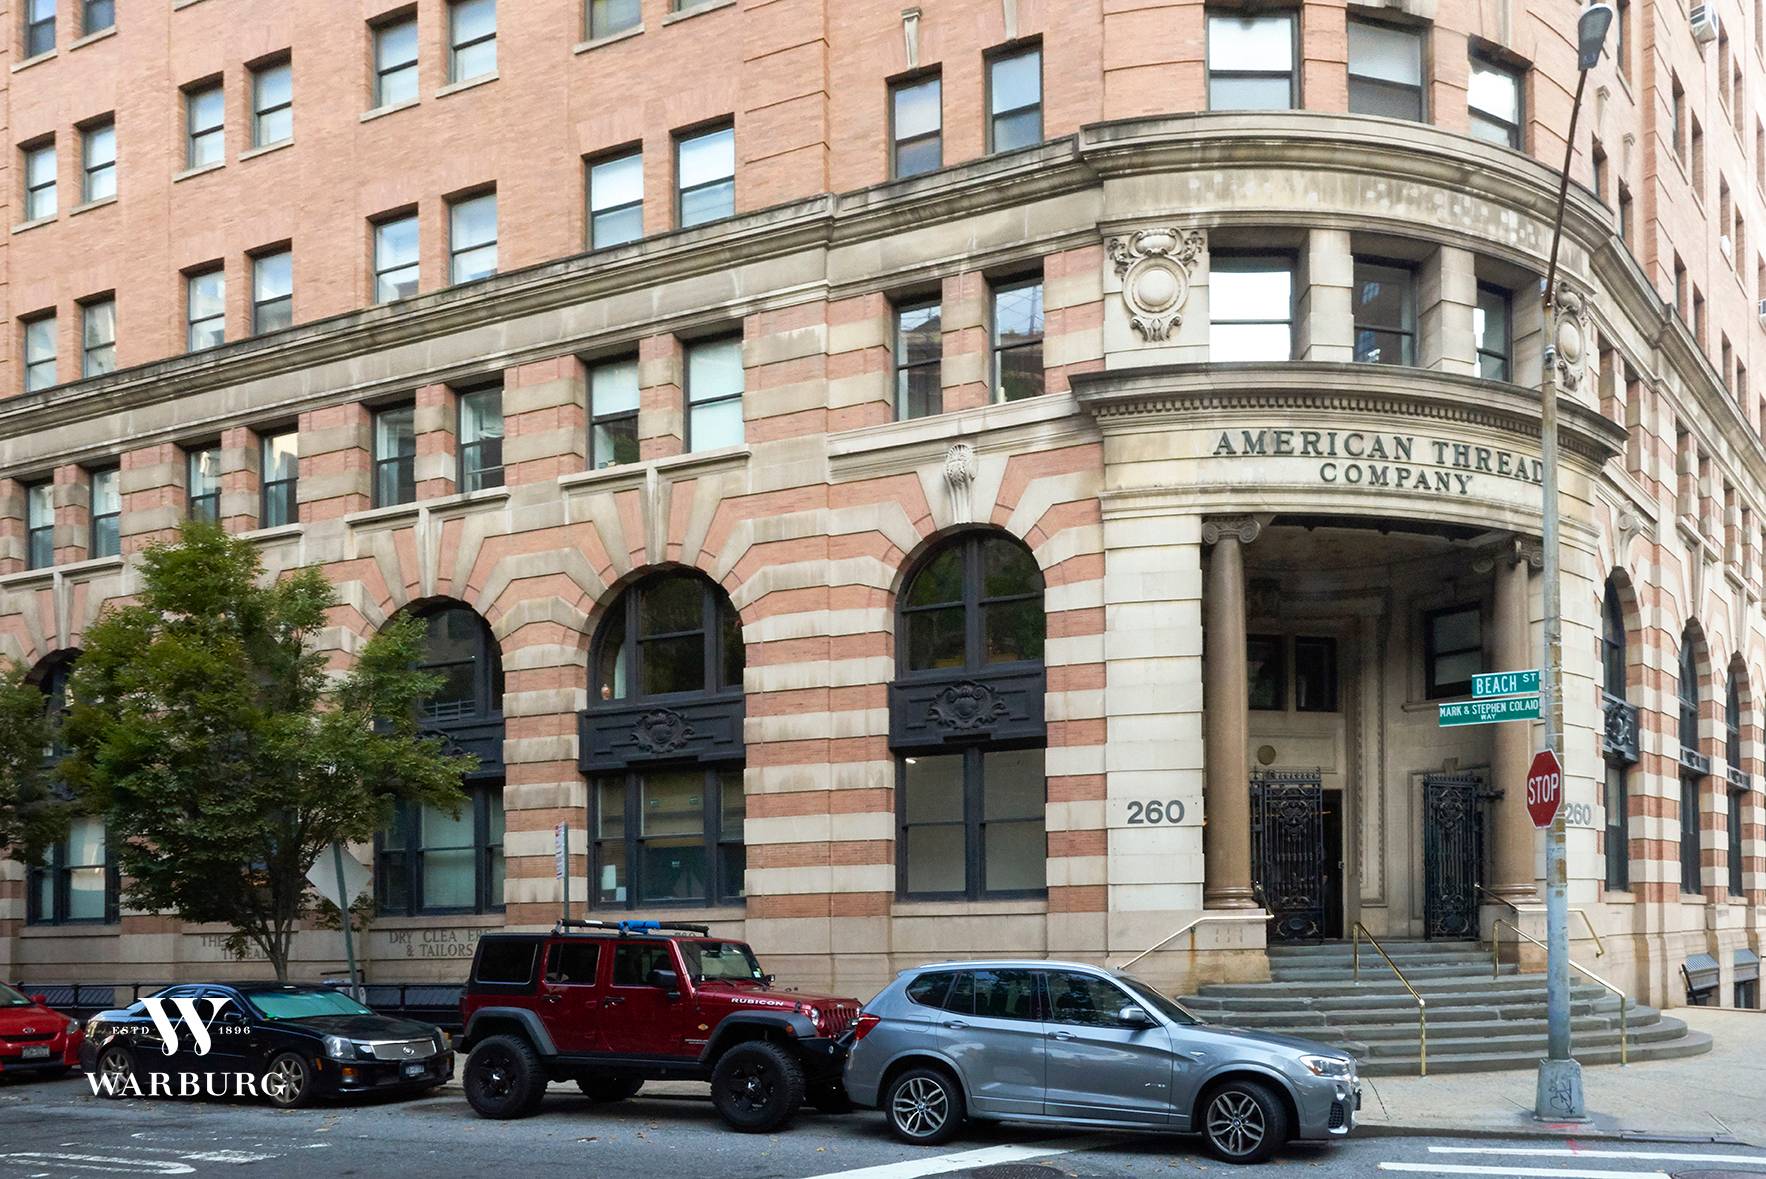 This attractive retail condo offers an outstanding opportunity for a user or investor to own a piece of the American Thread Building.